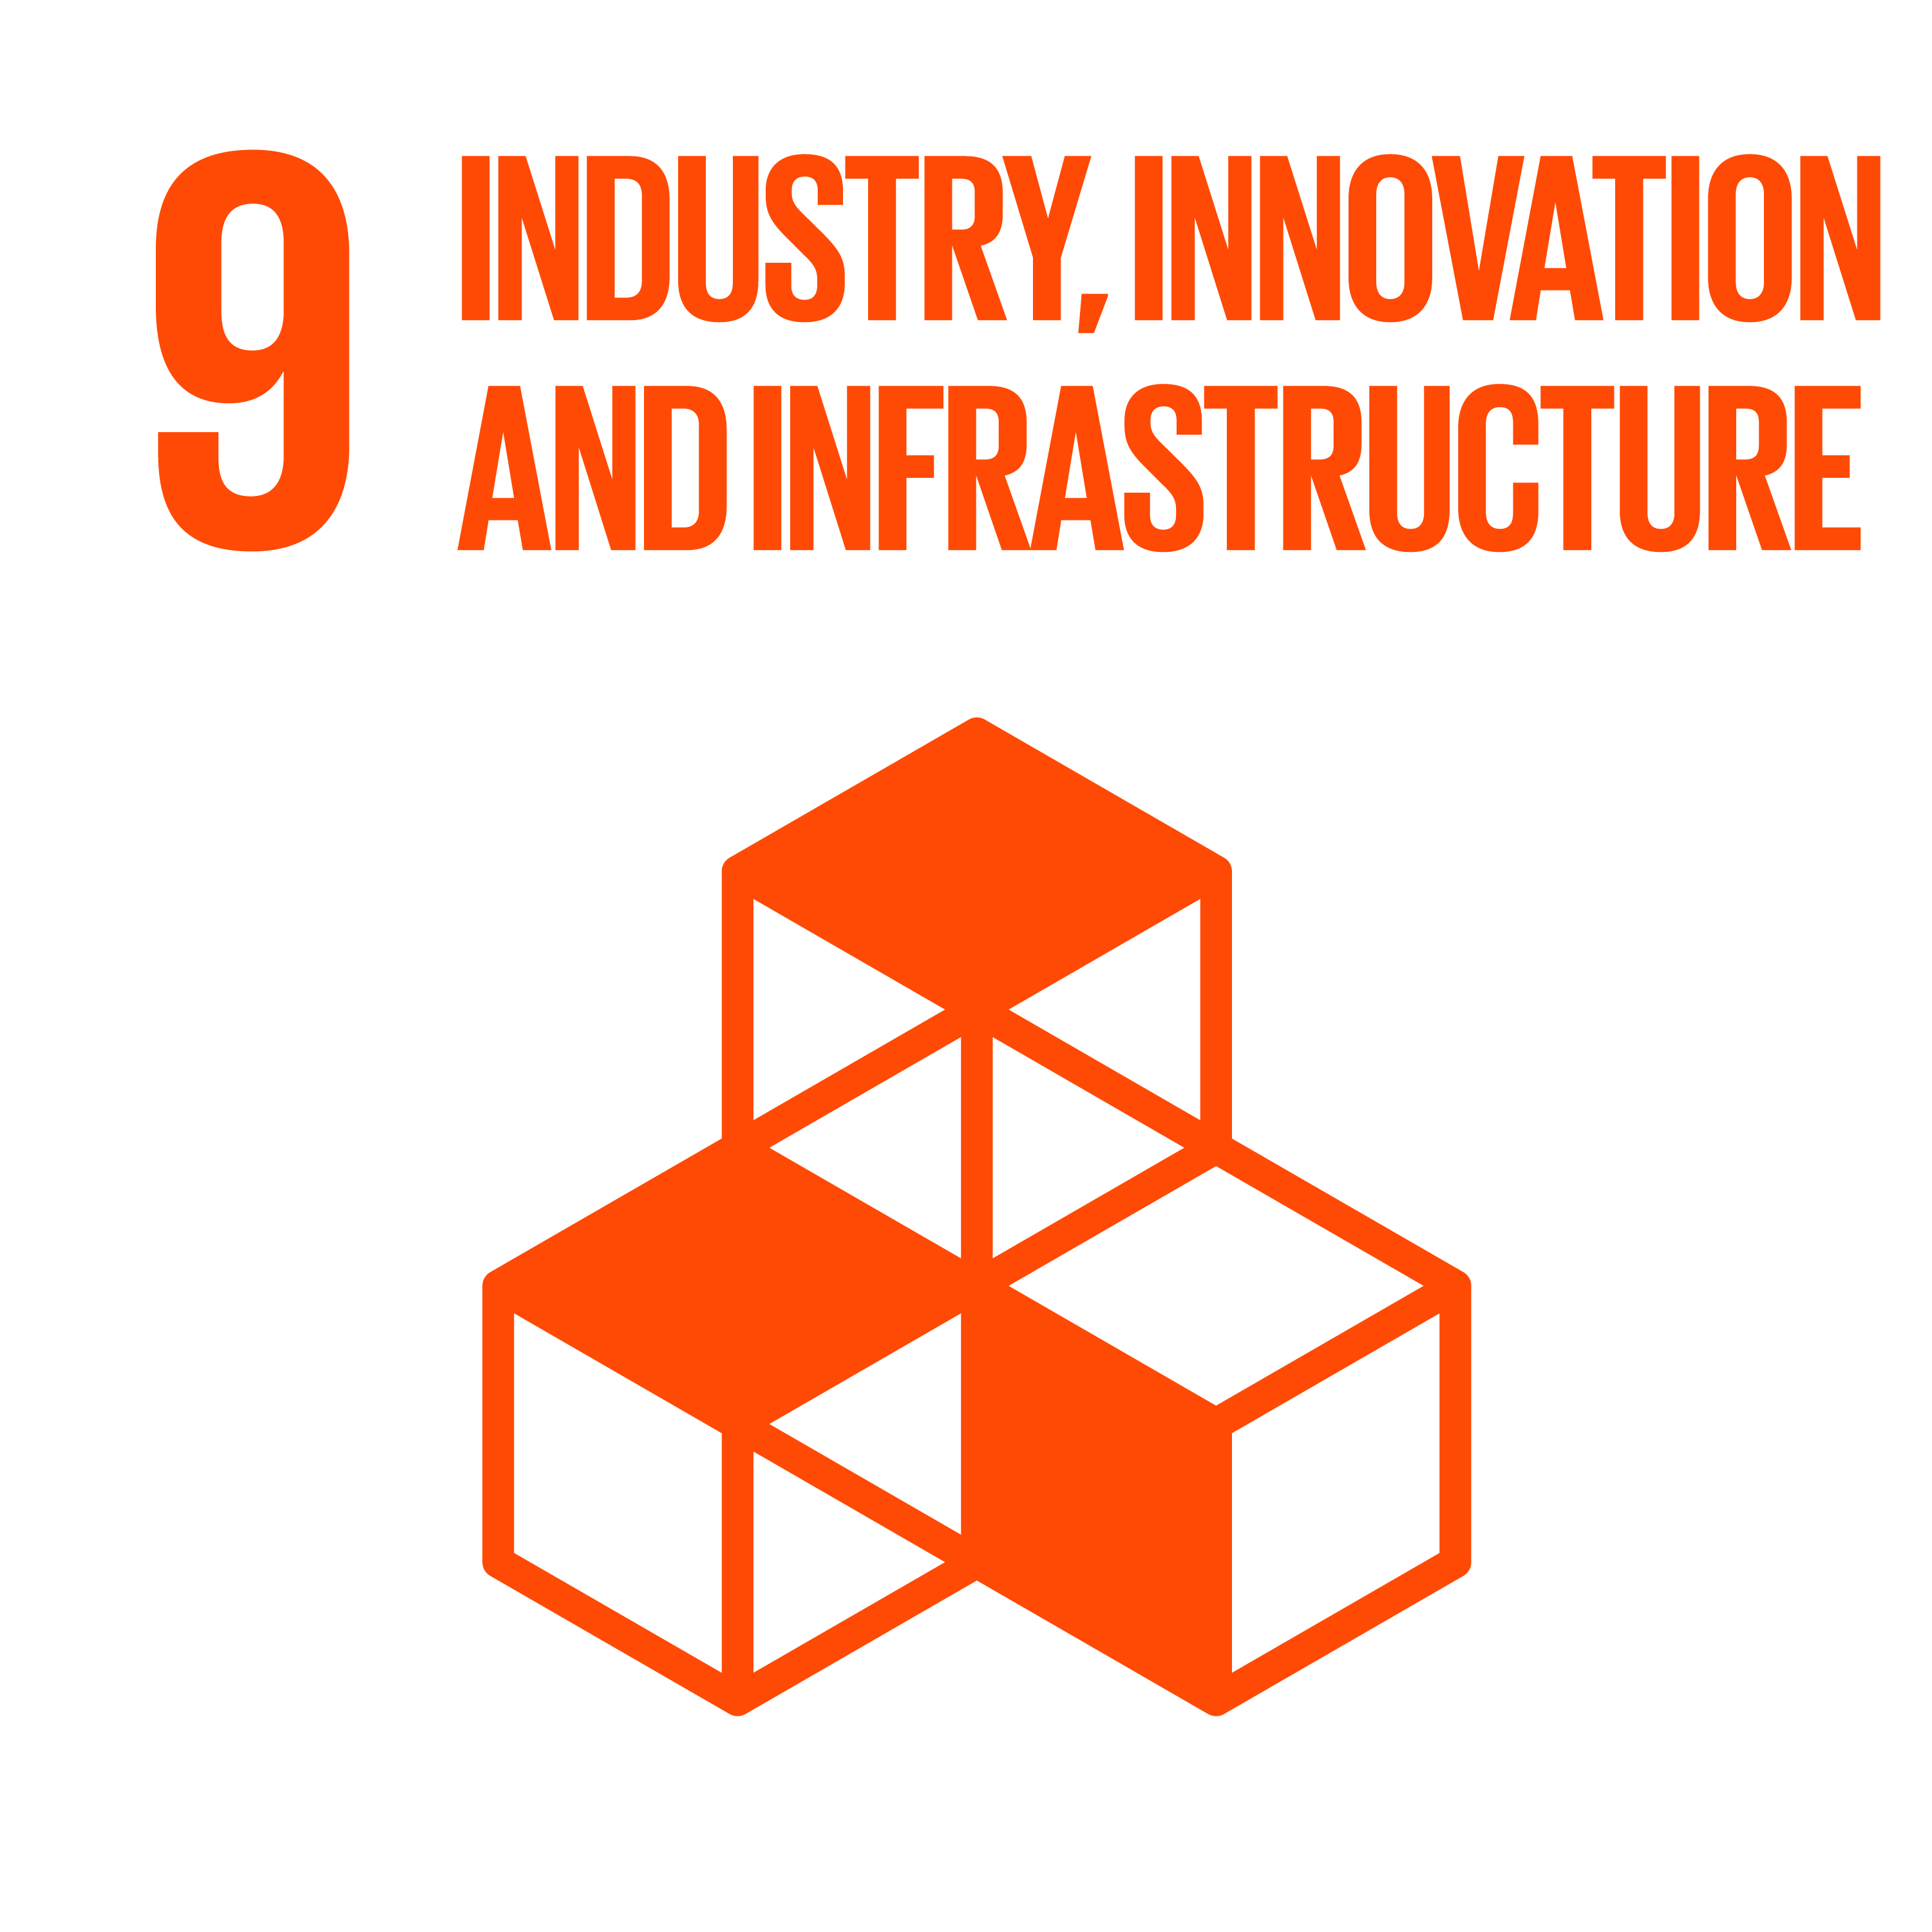 Sustainable development goals: Industry, innovation and infrastructure